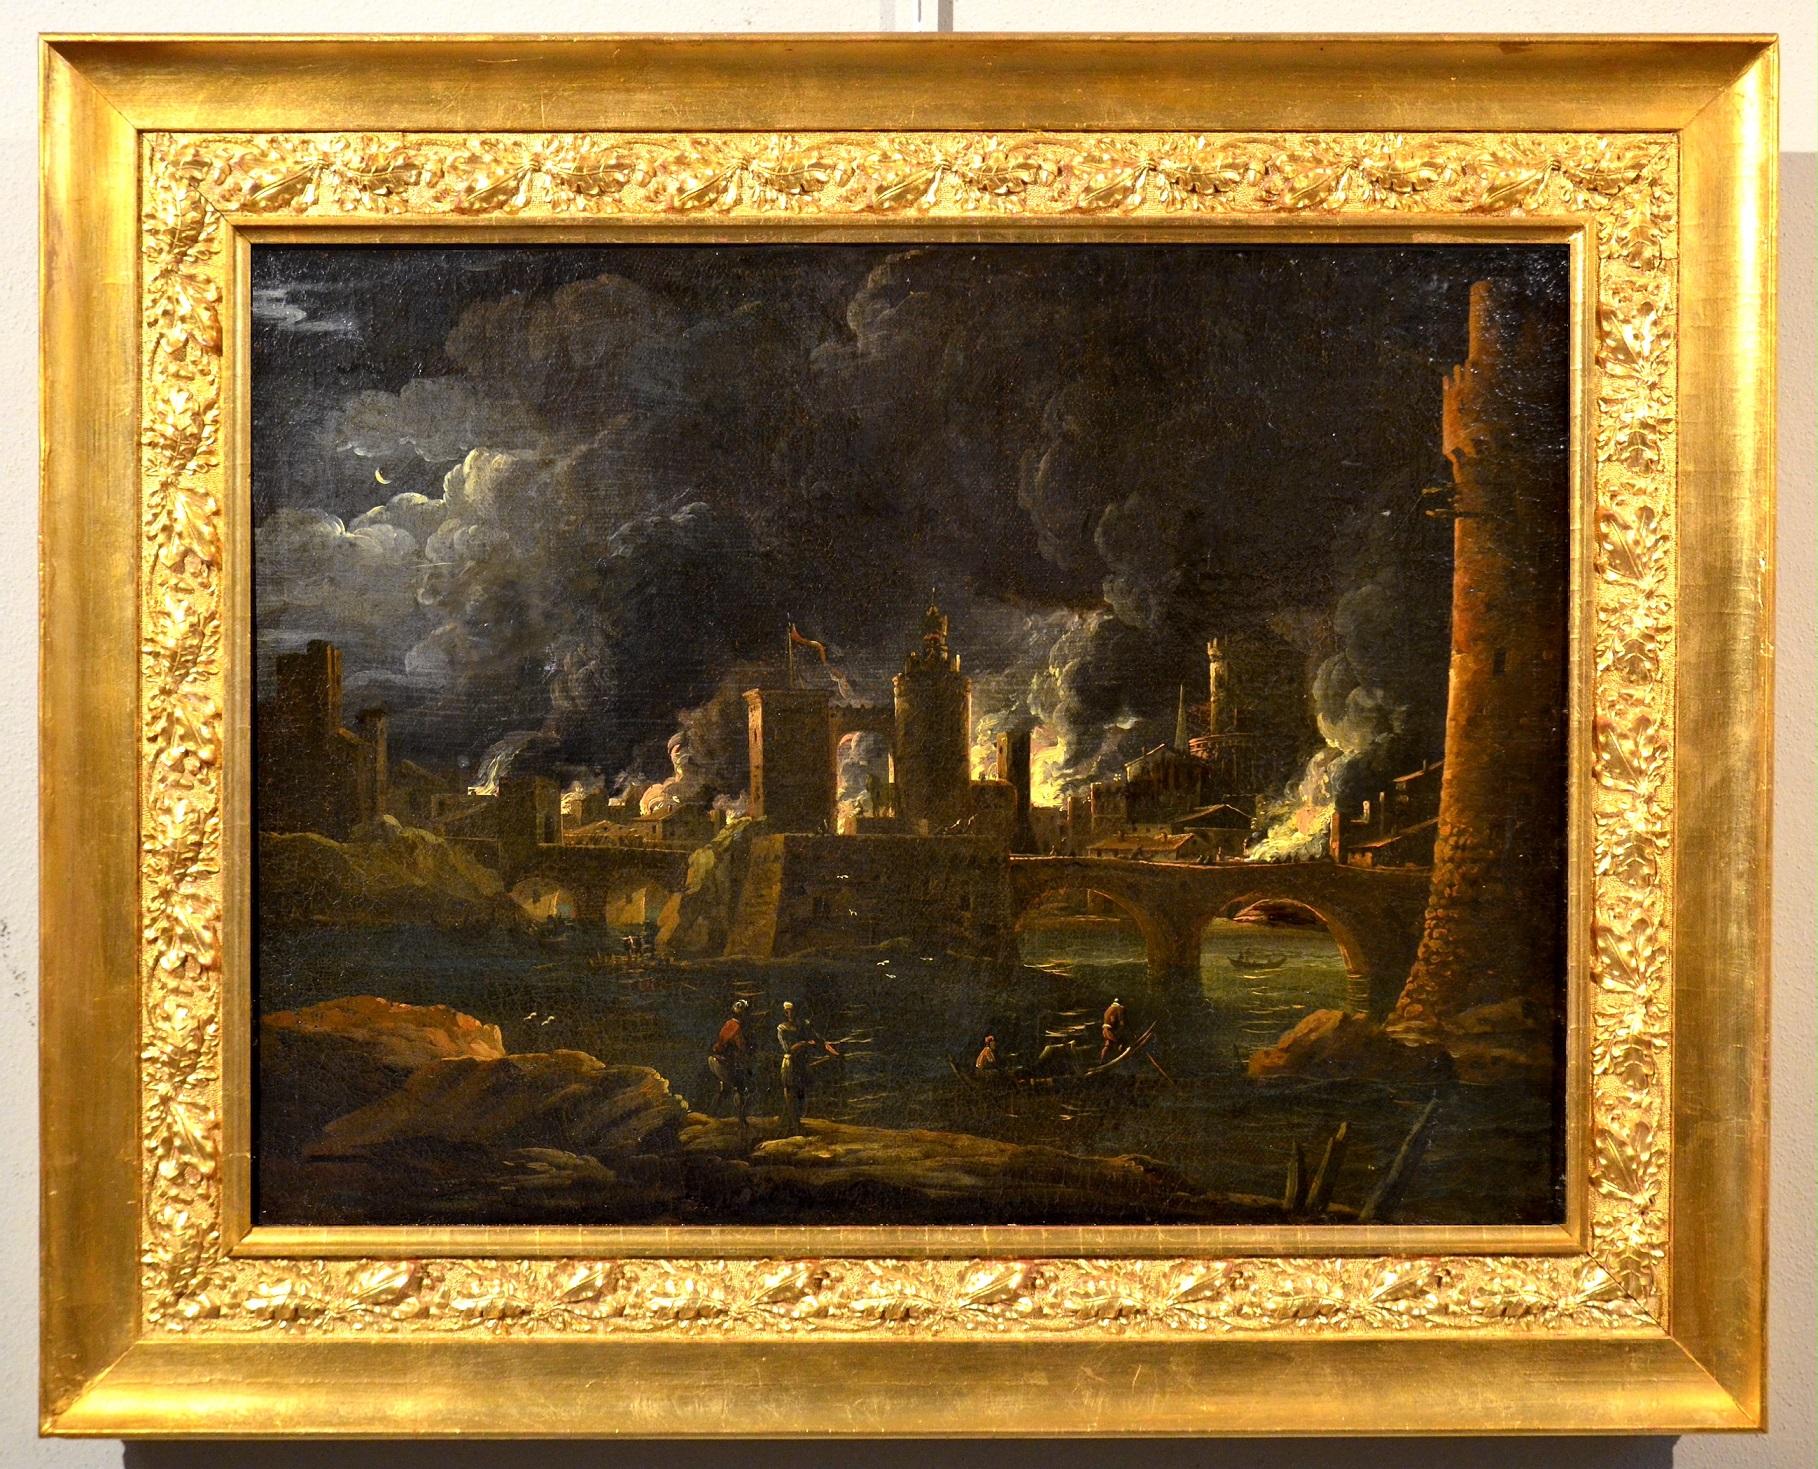 Nocturnal Landscape Troy Grevenbroeck Paint Oil on canvas Old master 17th Centur - Painting by Giovanni Grevenbroeck, known as il Solfarolo (Netherlands, c. 1650 - Milan, post 1699)